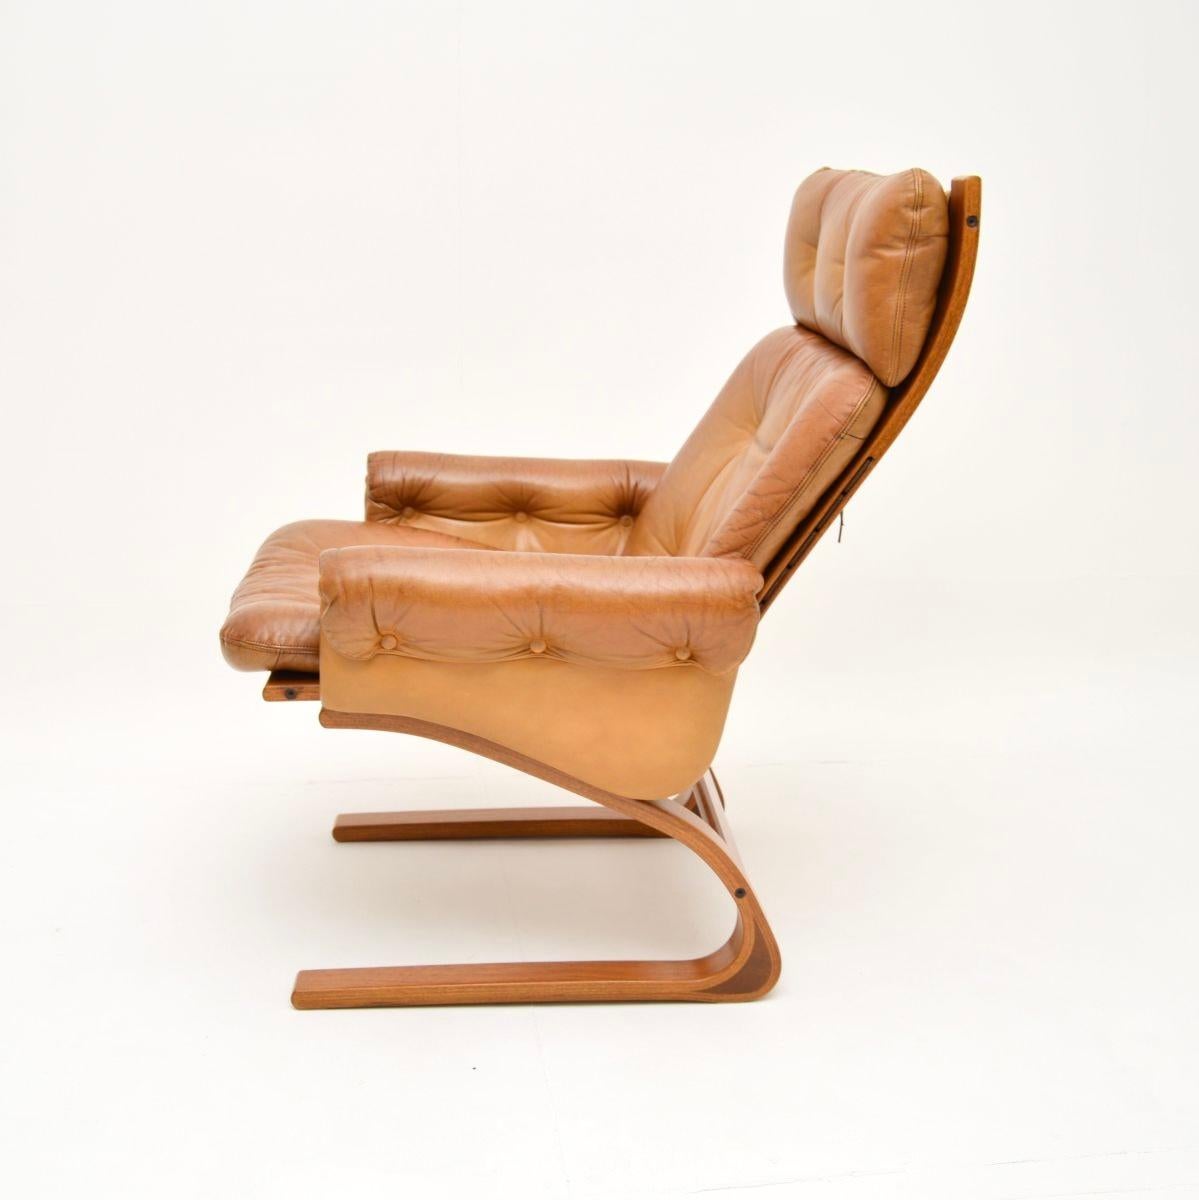 Pair of Vintage Leather Kengu Armchairs by Elsa and Nordahl Solheim for Rykken In Good Condition For Sale In London, GB